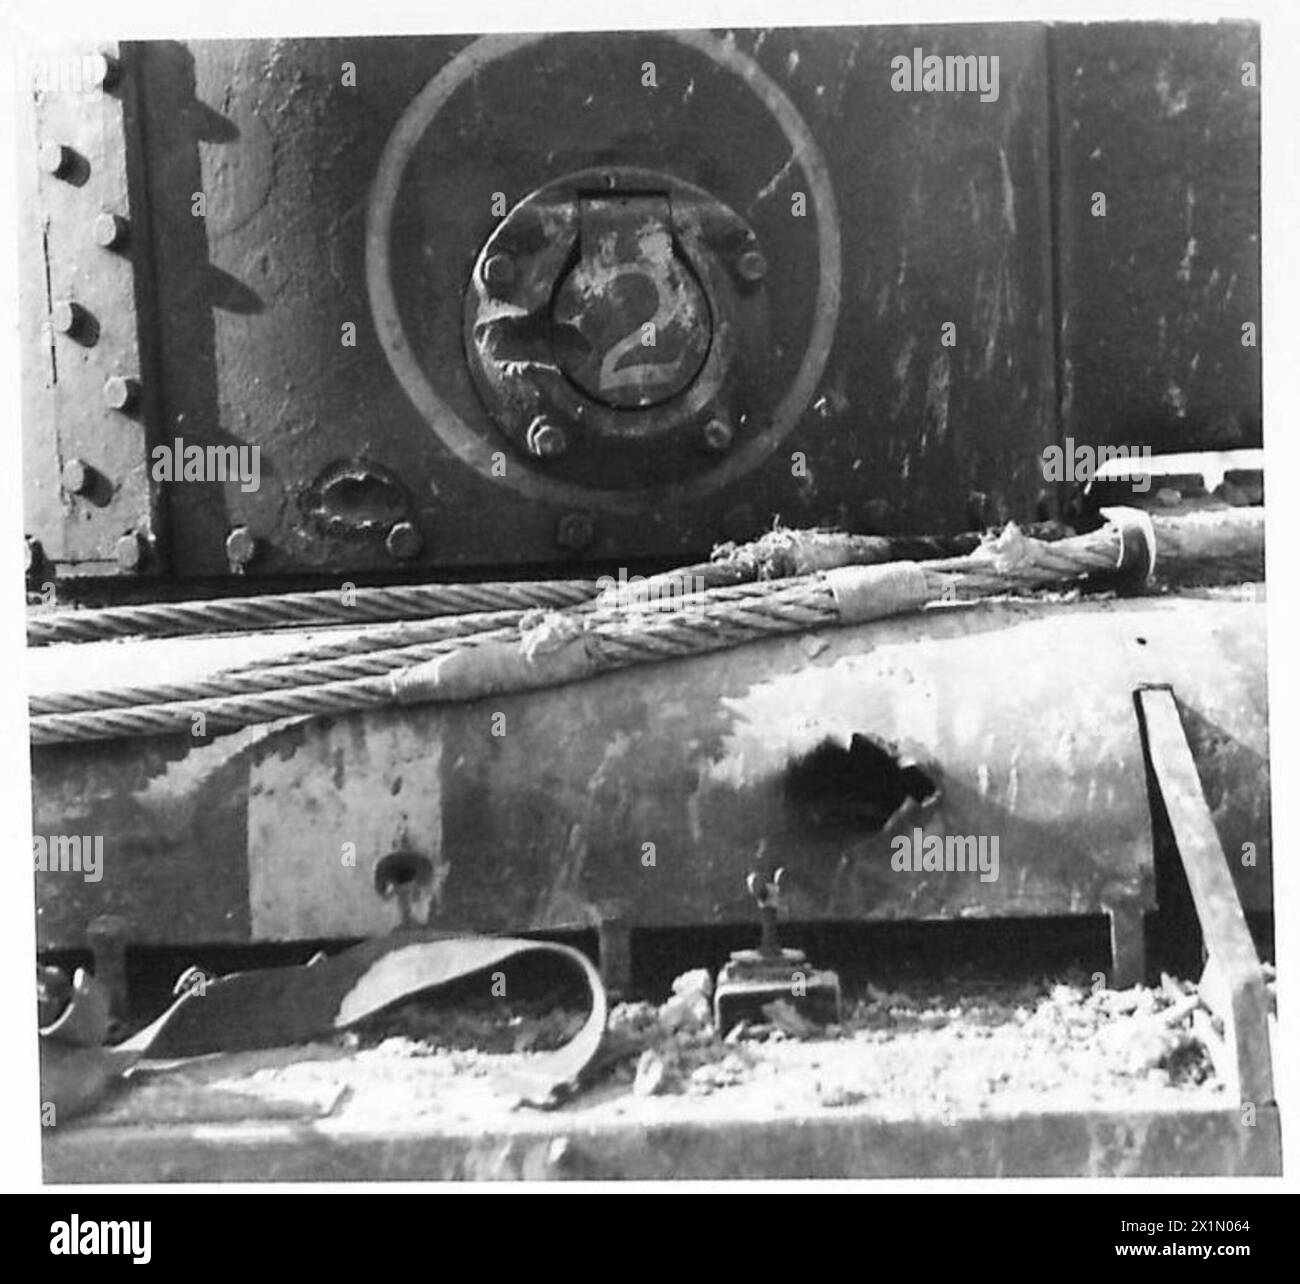 THE BRITISH ARMY IN THE TUNISIA CAMPAIGN, NOVEMBER 1942-MAY 1943 - Battle scars on a a Valentine tank of the 'C' Squadron of one of the 6th Armoured Division's regiments. Two hits of German 50 mm anti-tank shells from the close range distance of 150 yards. The damage seen in the bottom right was caused by a shell which penetrated the tank without serious harm. The Battle of Bou Arada. A forward observation post held by the Germans was known as 'Two Tree' Hill as on its highest point two trees grew. It was important to take the hill as it had advantageous position commanding all the approaches Stock Photo